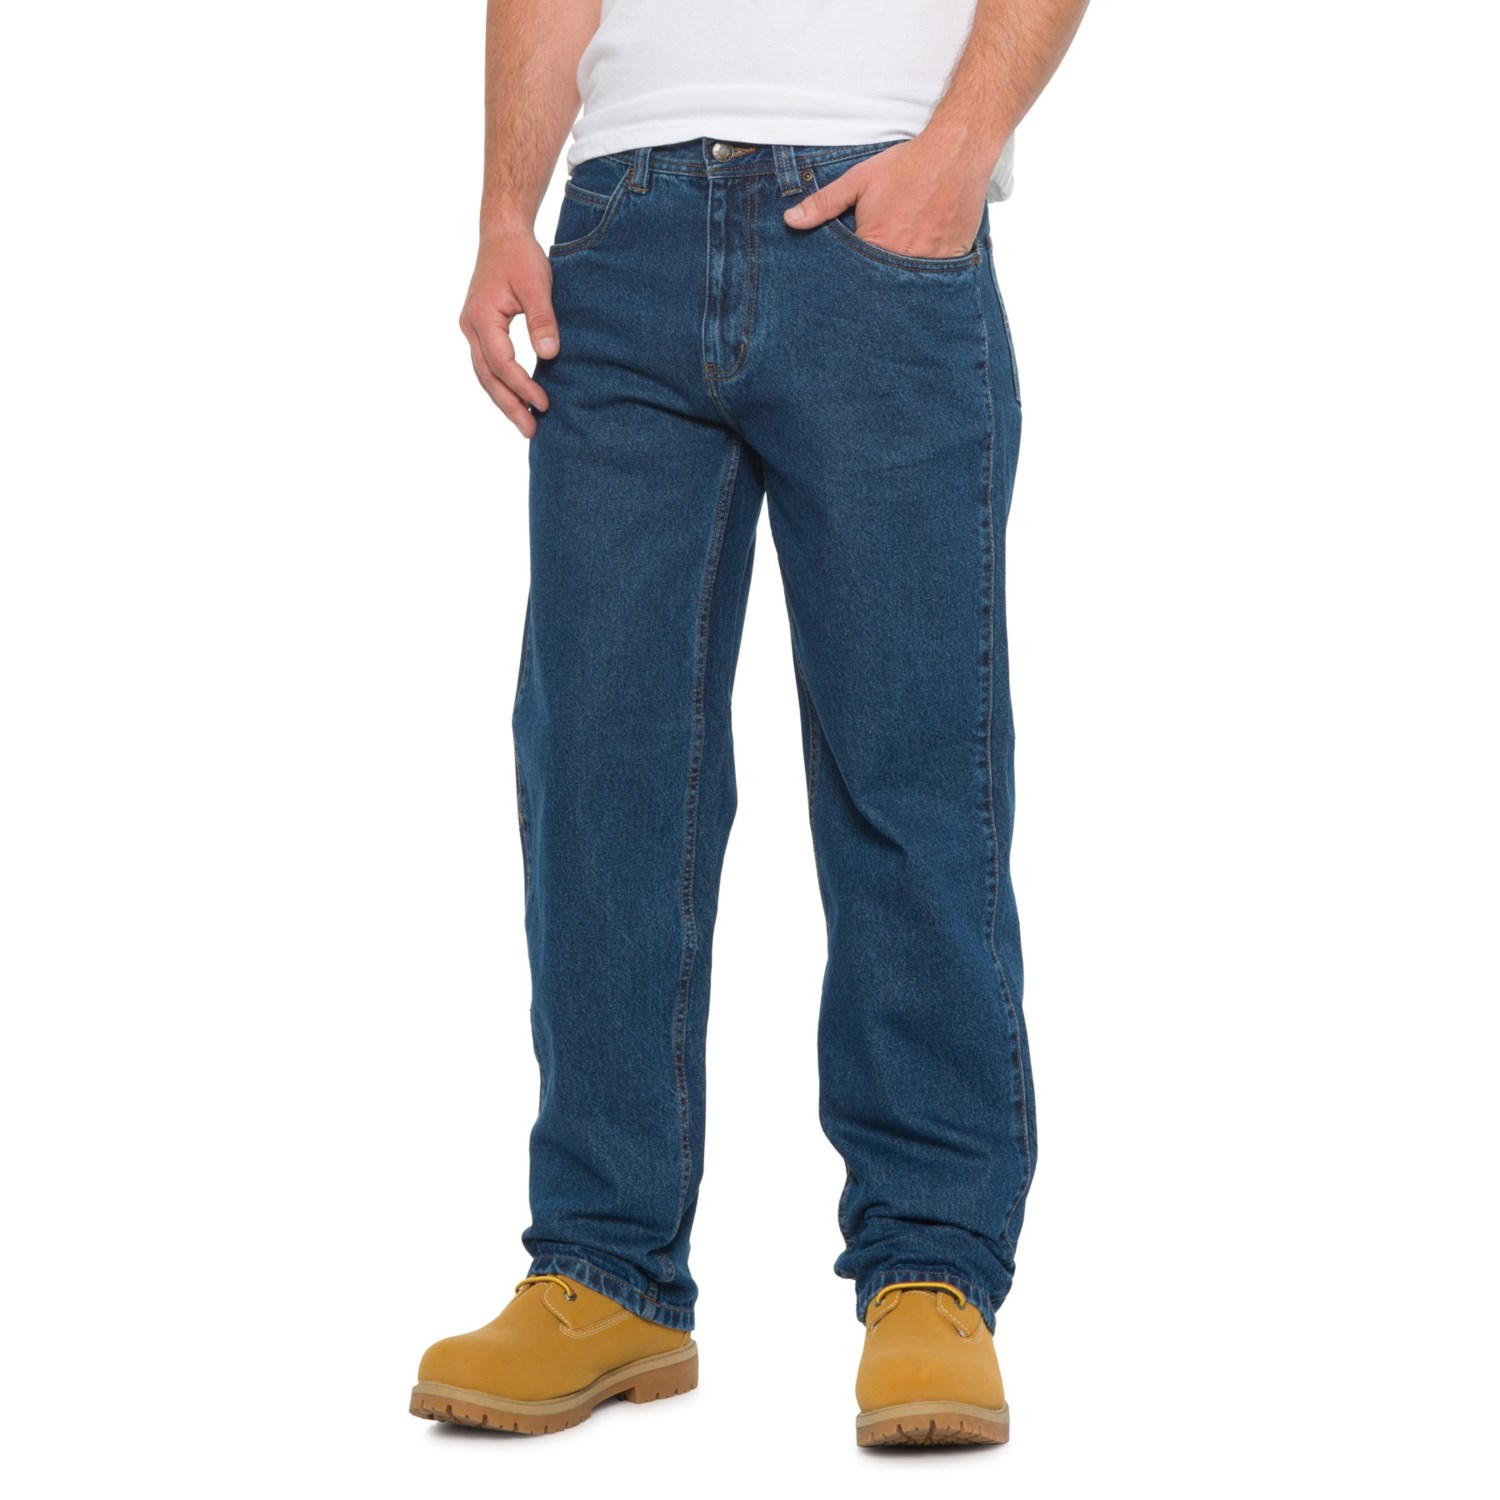 FIVEBROTHER Traditional Fit Jeans (For Men) - Save 61%